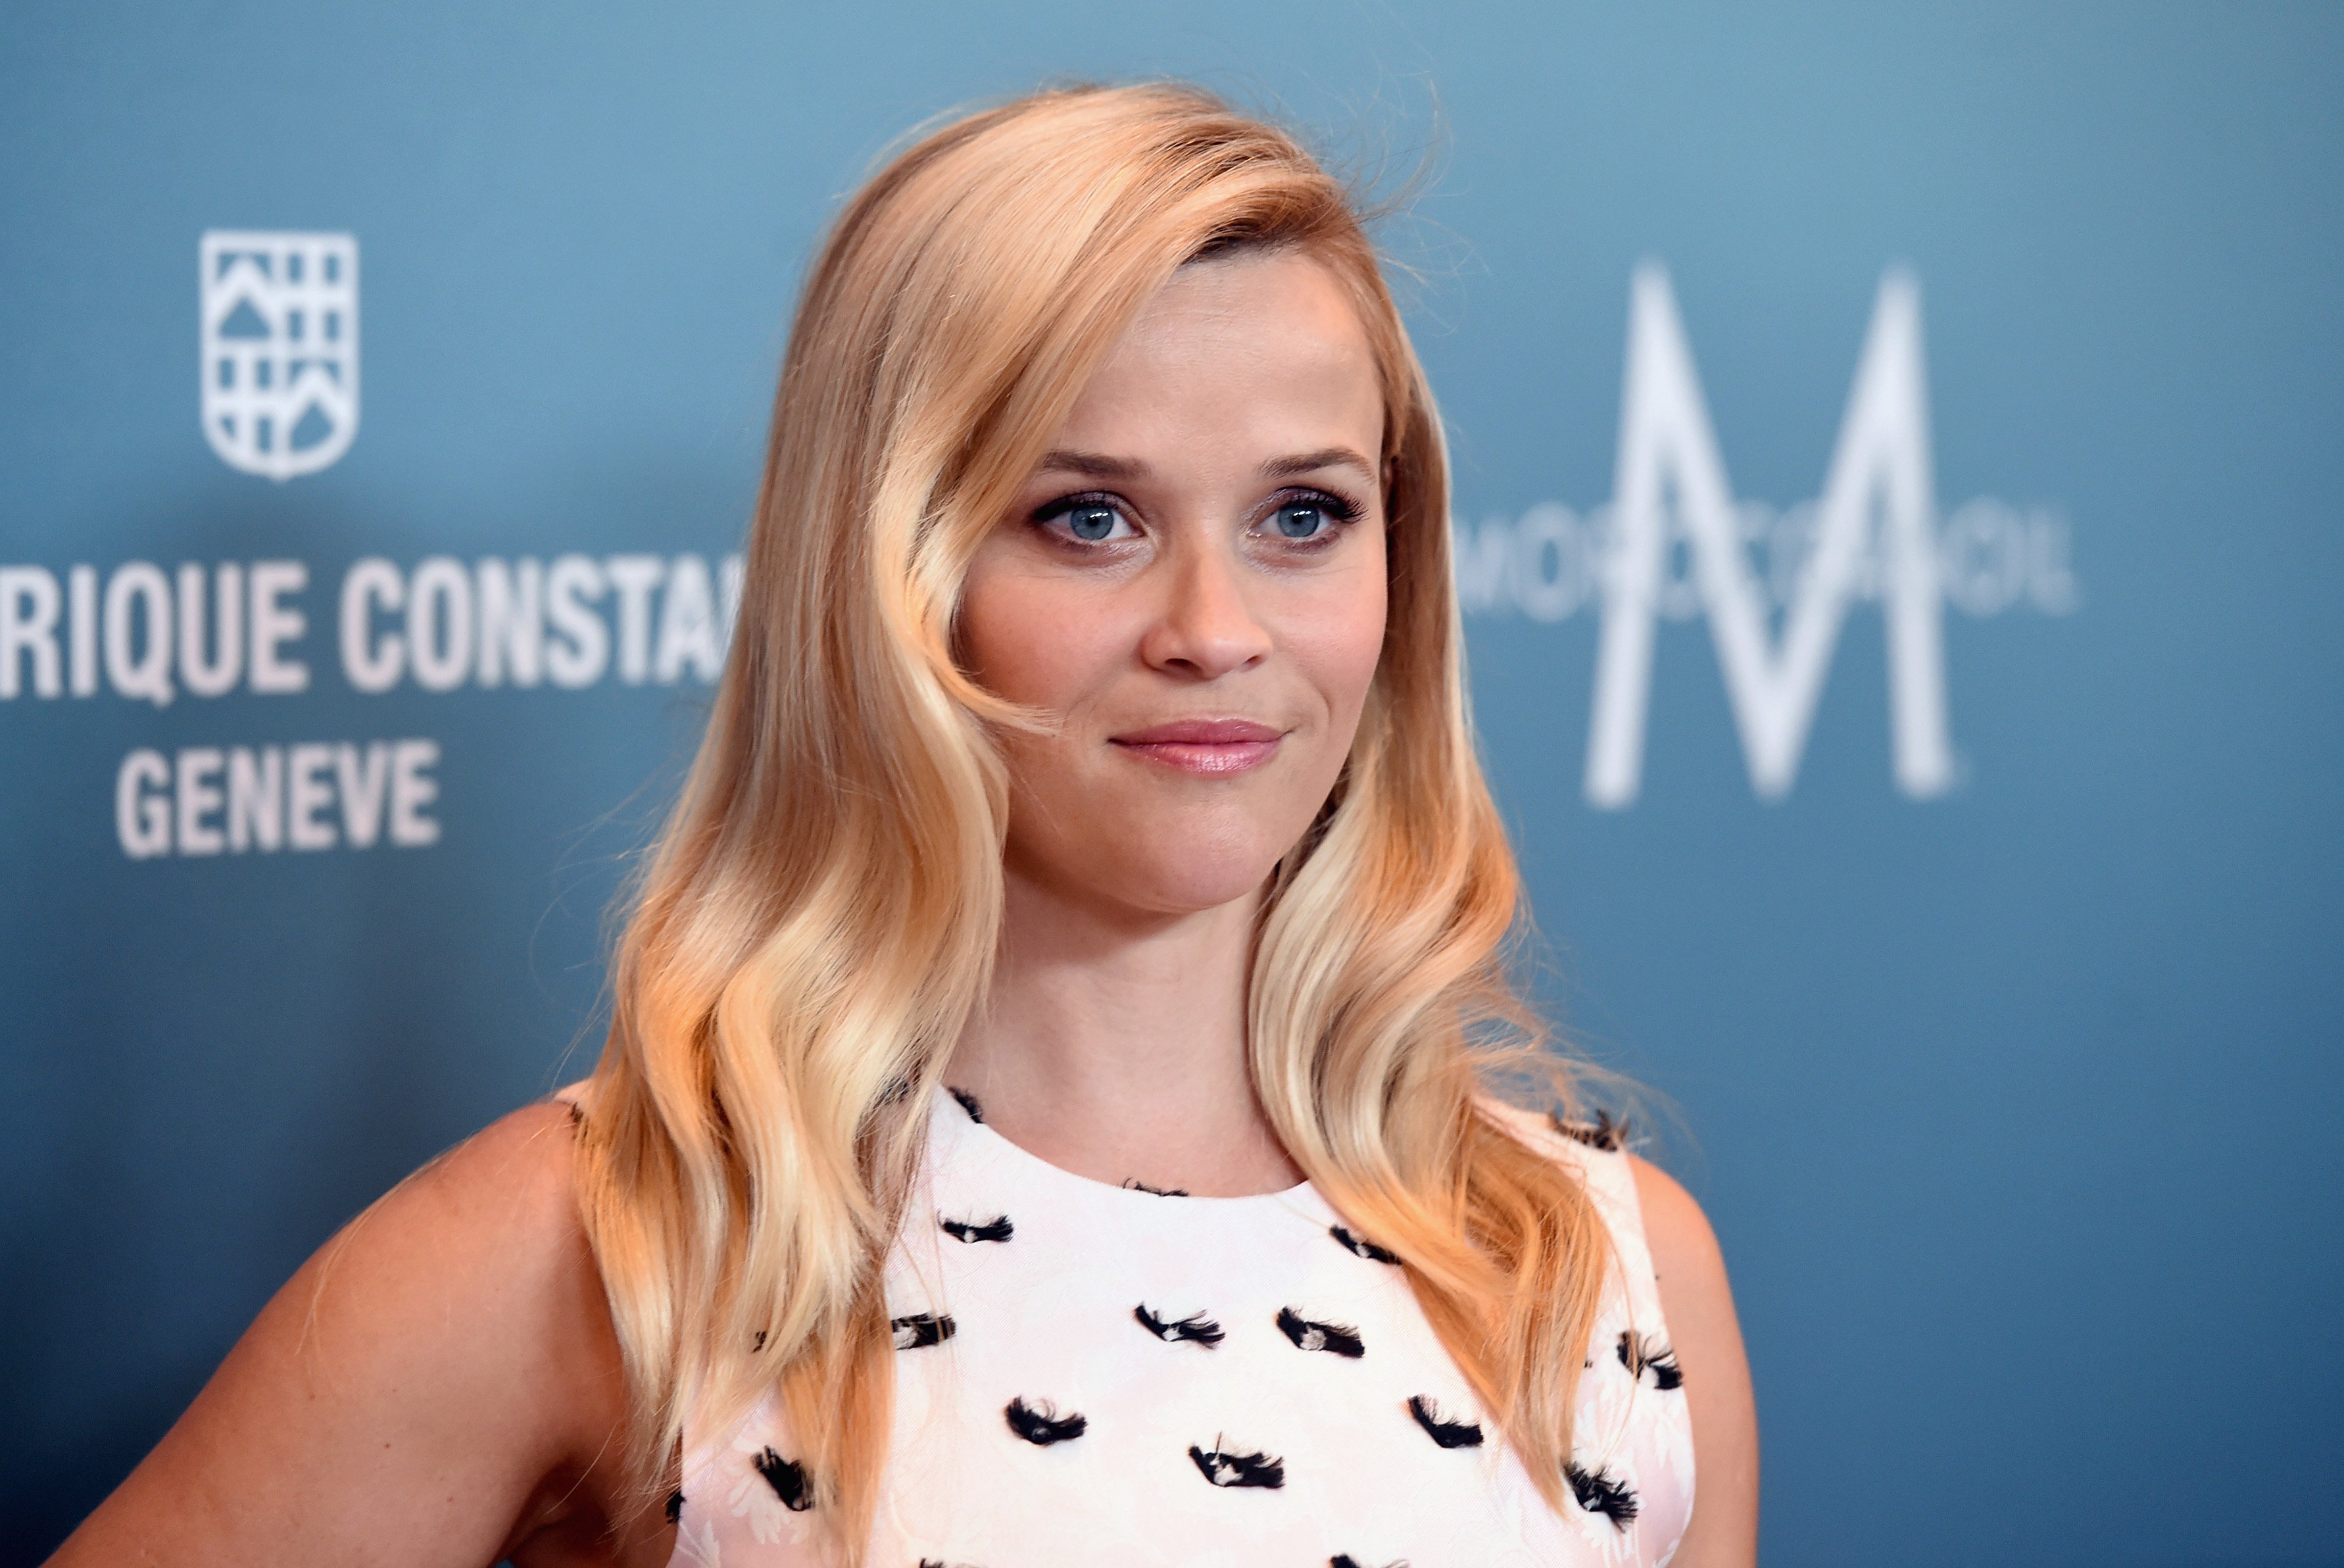 Reece Witherspoon pictured at Variety's Power Of Women Luncheon at the Beverly Wilshire Four Seasons Hotel, October 2015, Beverly Hills, California. | Photo: Getty Images